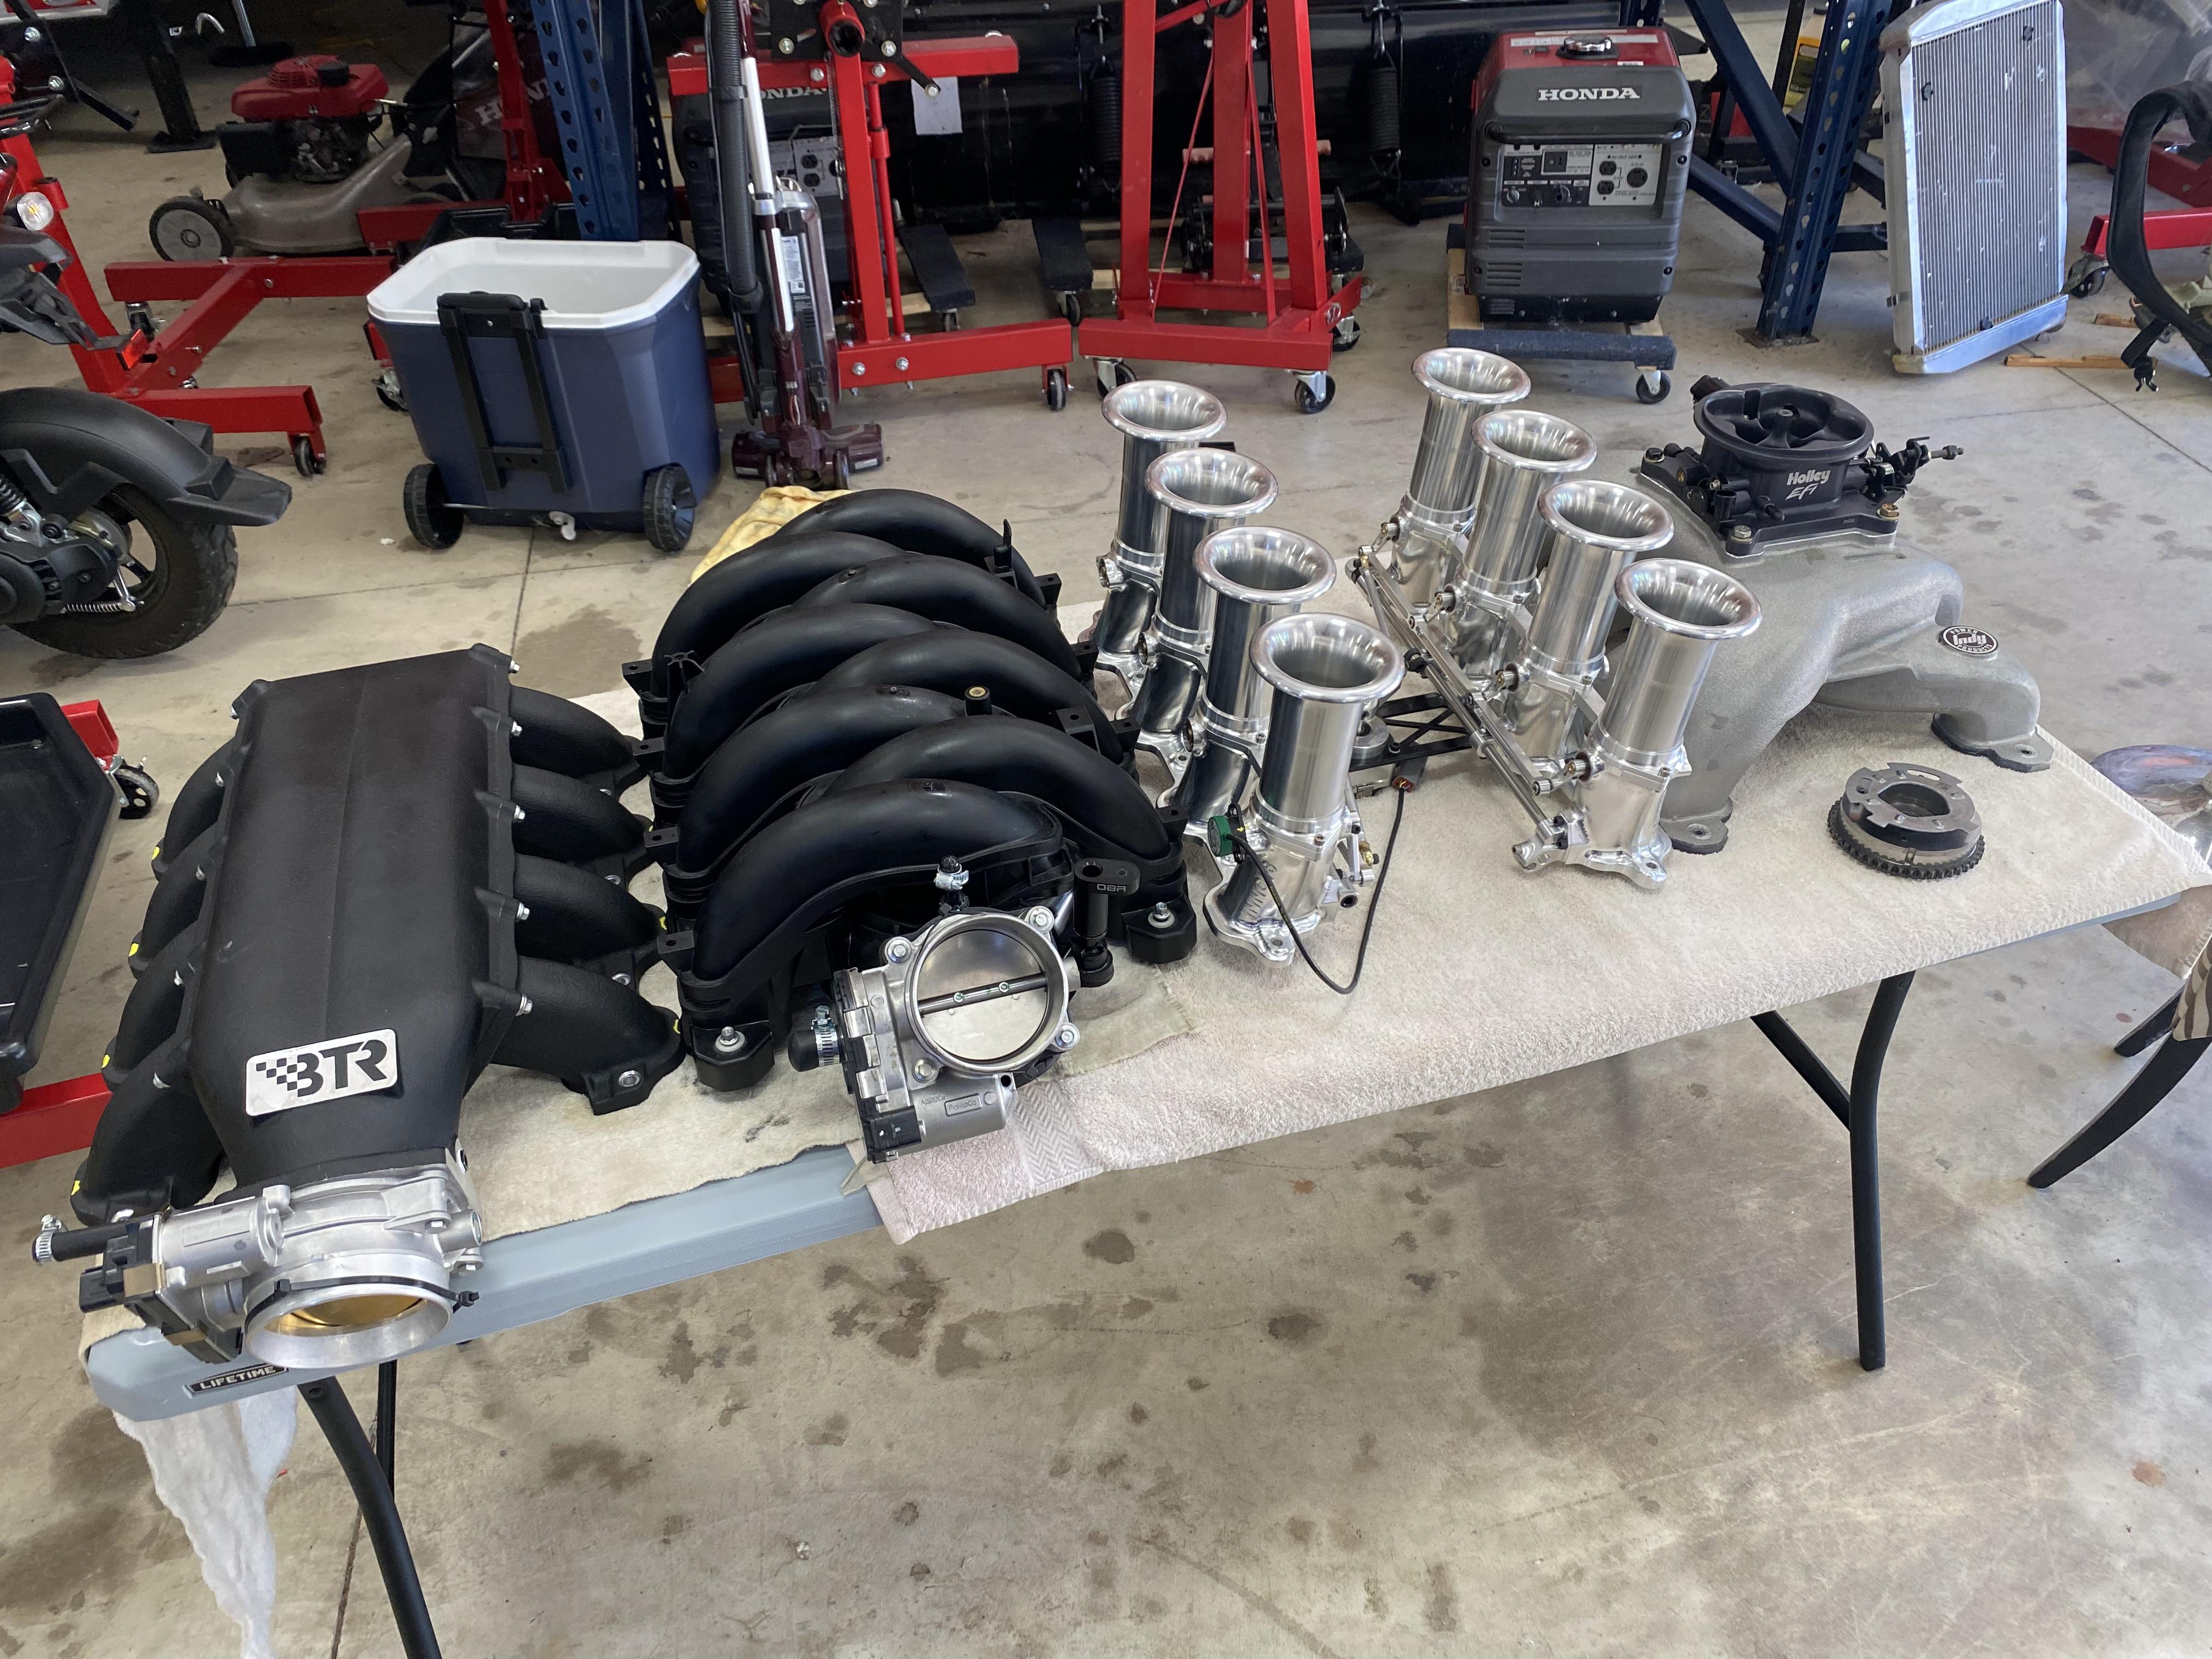 What are the benefits of an aftermarket intake manifold?